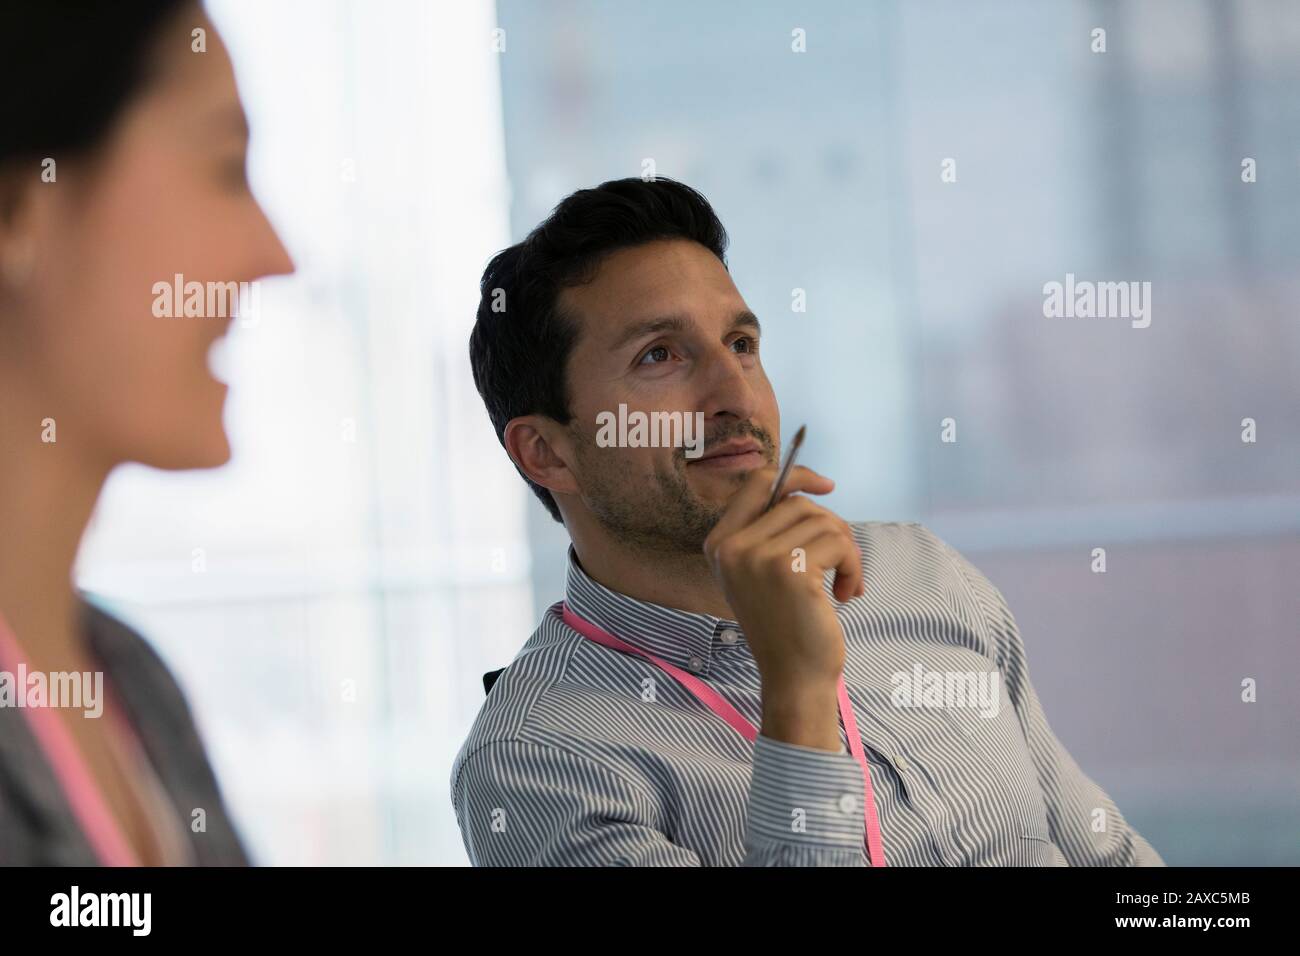 Smiling businessman listening in meeting Banque D'Images